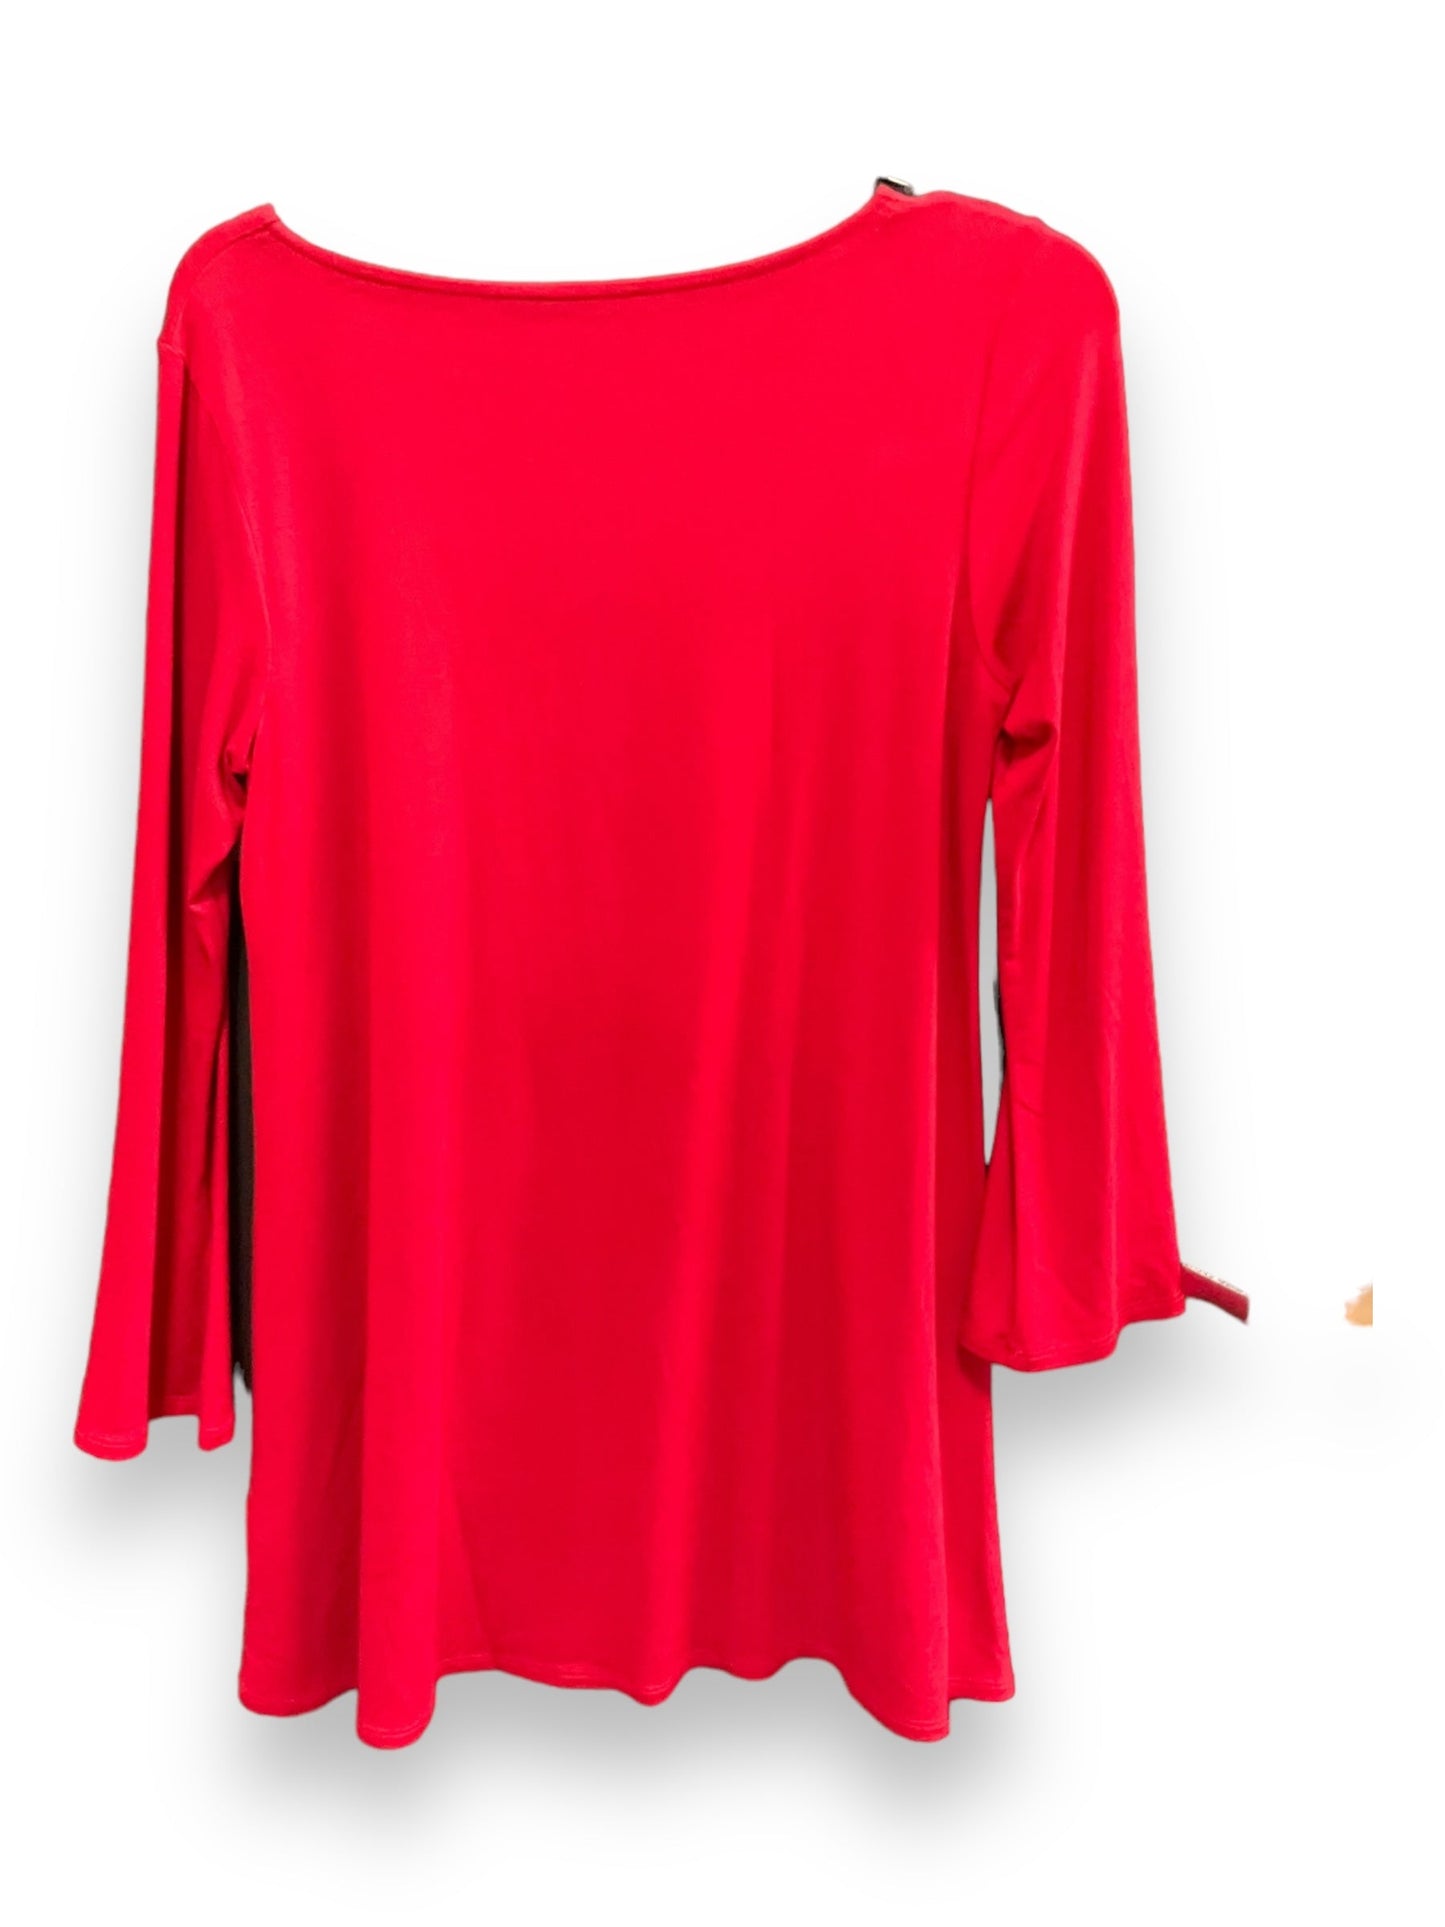 Red Top Long Sleeve Eileen Fisher, Size S